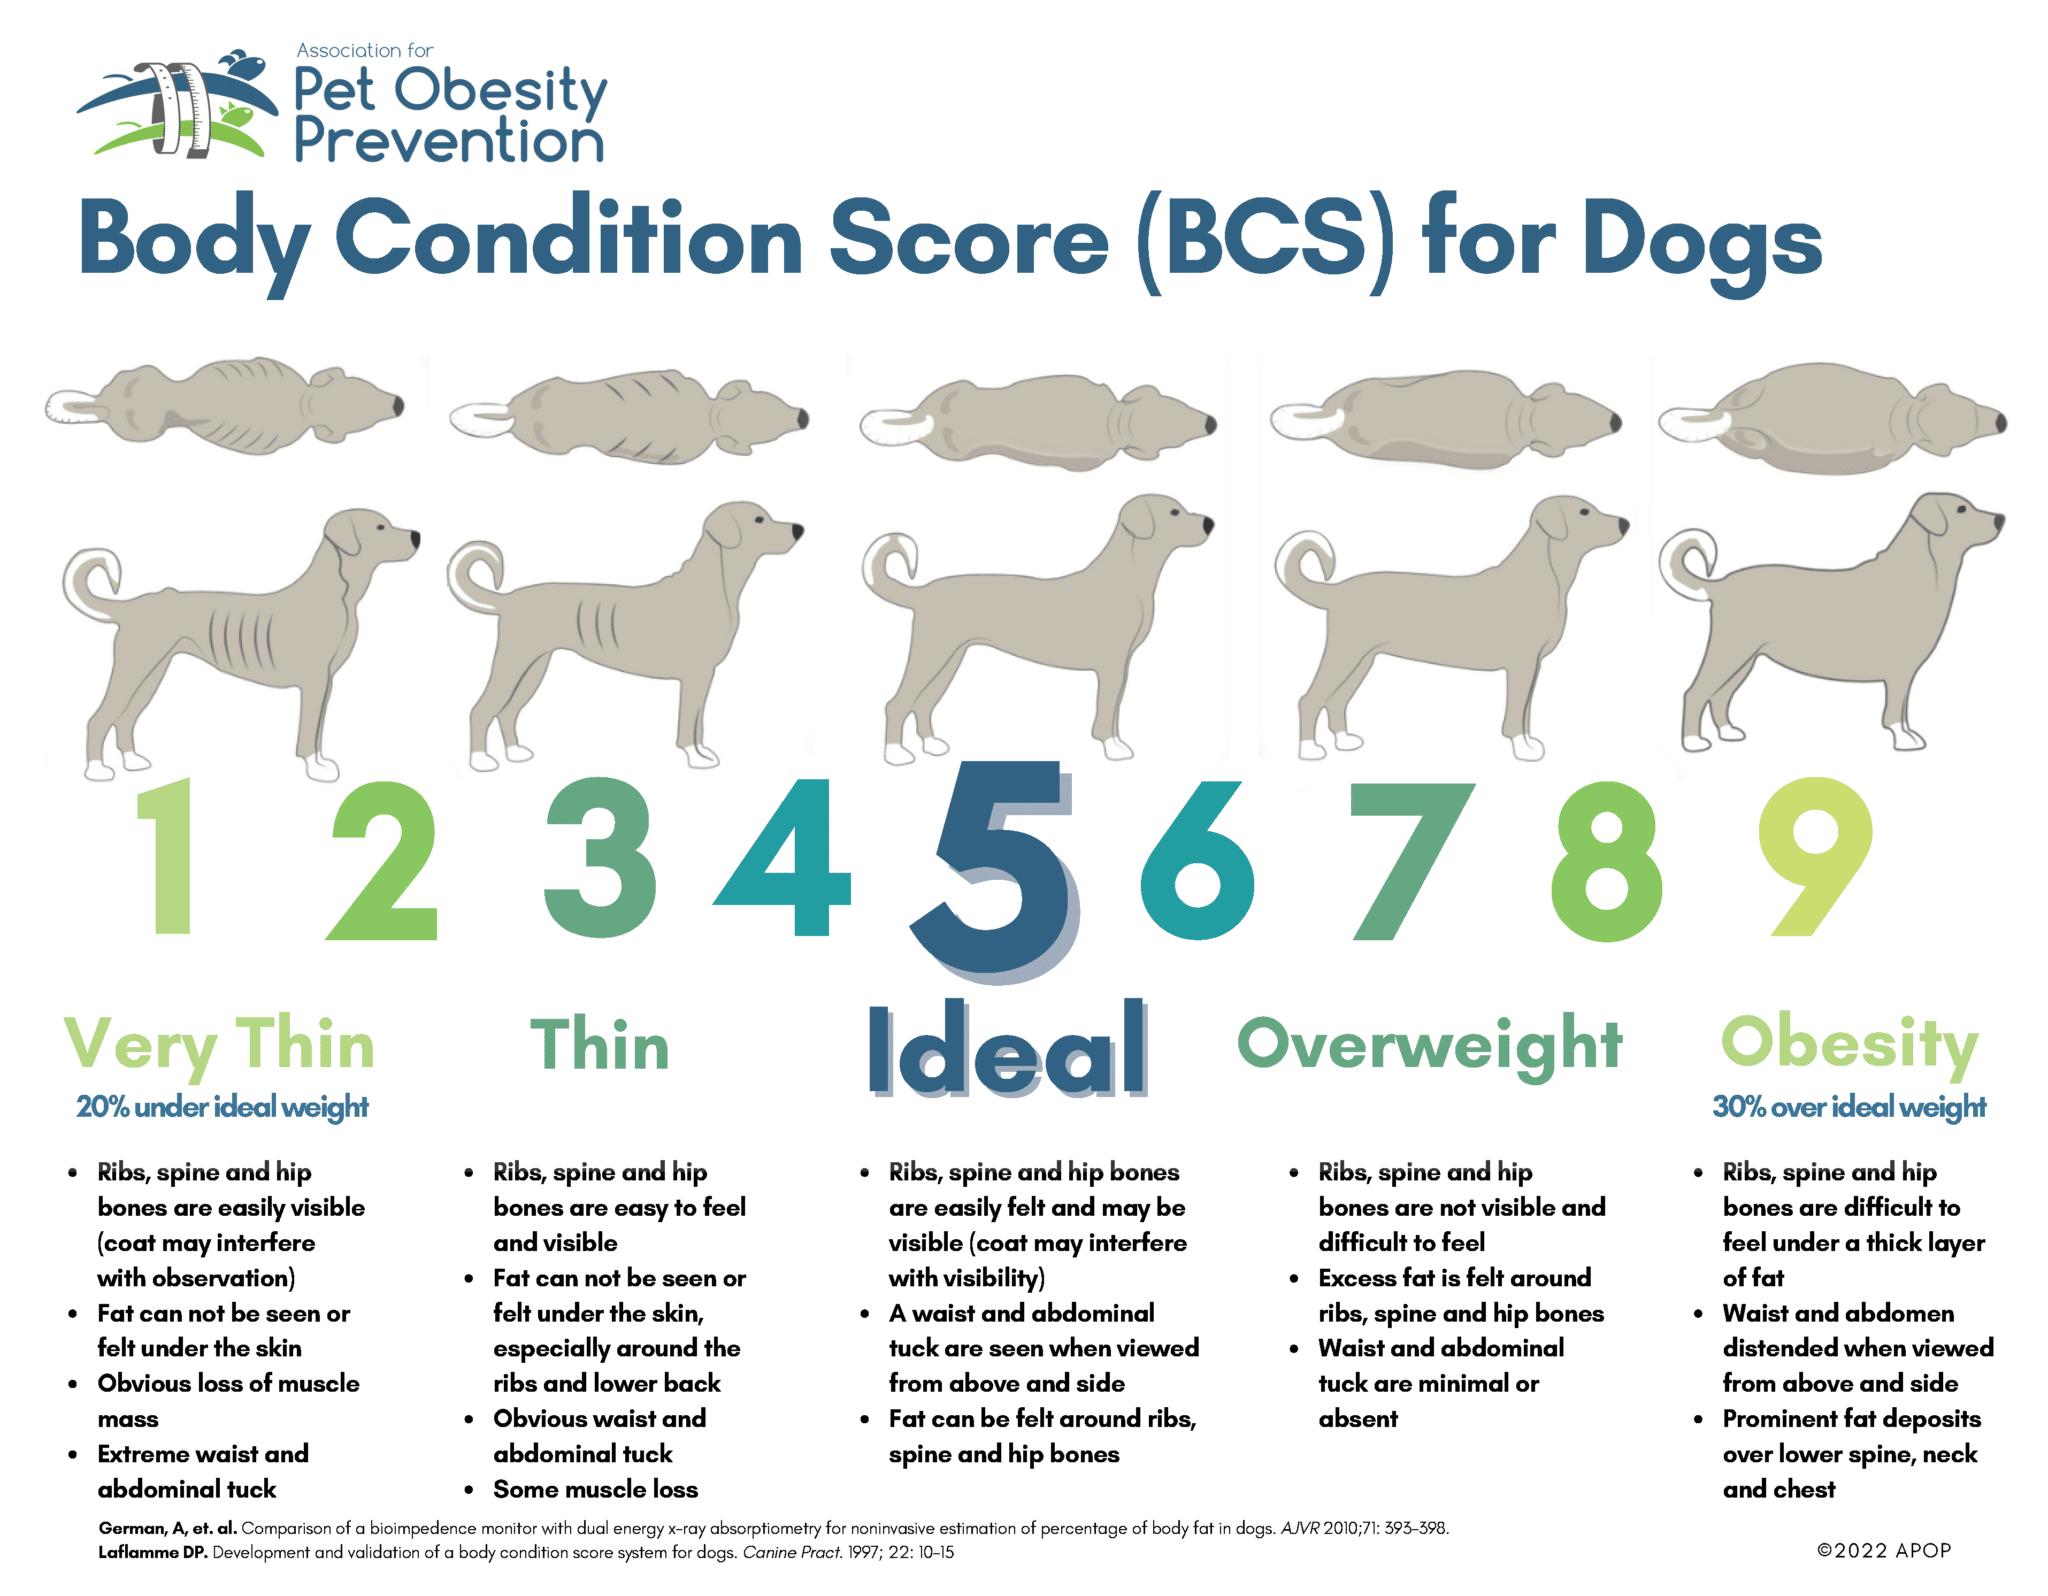 Body Condition Score (BCS) for Dogs Source: Association for Pet Obesity Prevention. VERY THIN (20% under ideal weight) Ribs, spine and hip bones are easily visible (coat may interfere with observation). Fat can not be seen or felt under the skin. Obvious loss of muscle mass. Extreme waist and abdominal tuck. THIN Ribs, spine and hip bones are easy to feel and visible. Fat cannot be seen or felt under the skin, especially around the ribs and lower back. Obvious waist and abdominal tuck. Some muscle loss. IDEAL Ribs, spine and hip bones are easily felt and may be visible (coat may interfere with visibility). A waist and abdominal tuck are seen when viewed from above and side. Fat can be felt around ribs, spine and hip bones. OVERWEIGHT Ribs, spine and hip bones are not visible and difficult to feel Excess fat is felt around ribs, spine and hip bones. Waist and abdominal tuck are minimal or absent. OBESITY (30% over ideal weight) Ribs, spine and hip bones are difficult to feel under a thick layer of fat Waist and abdomen distended when viewed from above and side Prominent fat deposits over lower spine, neck and chest.